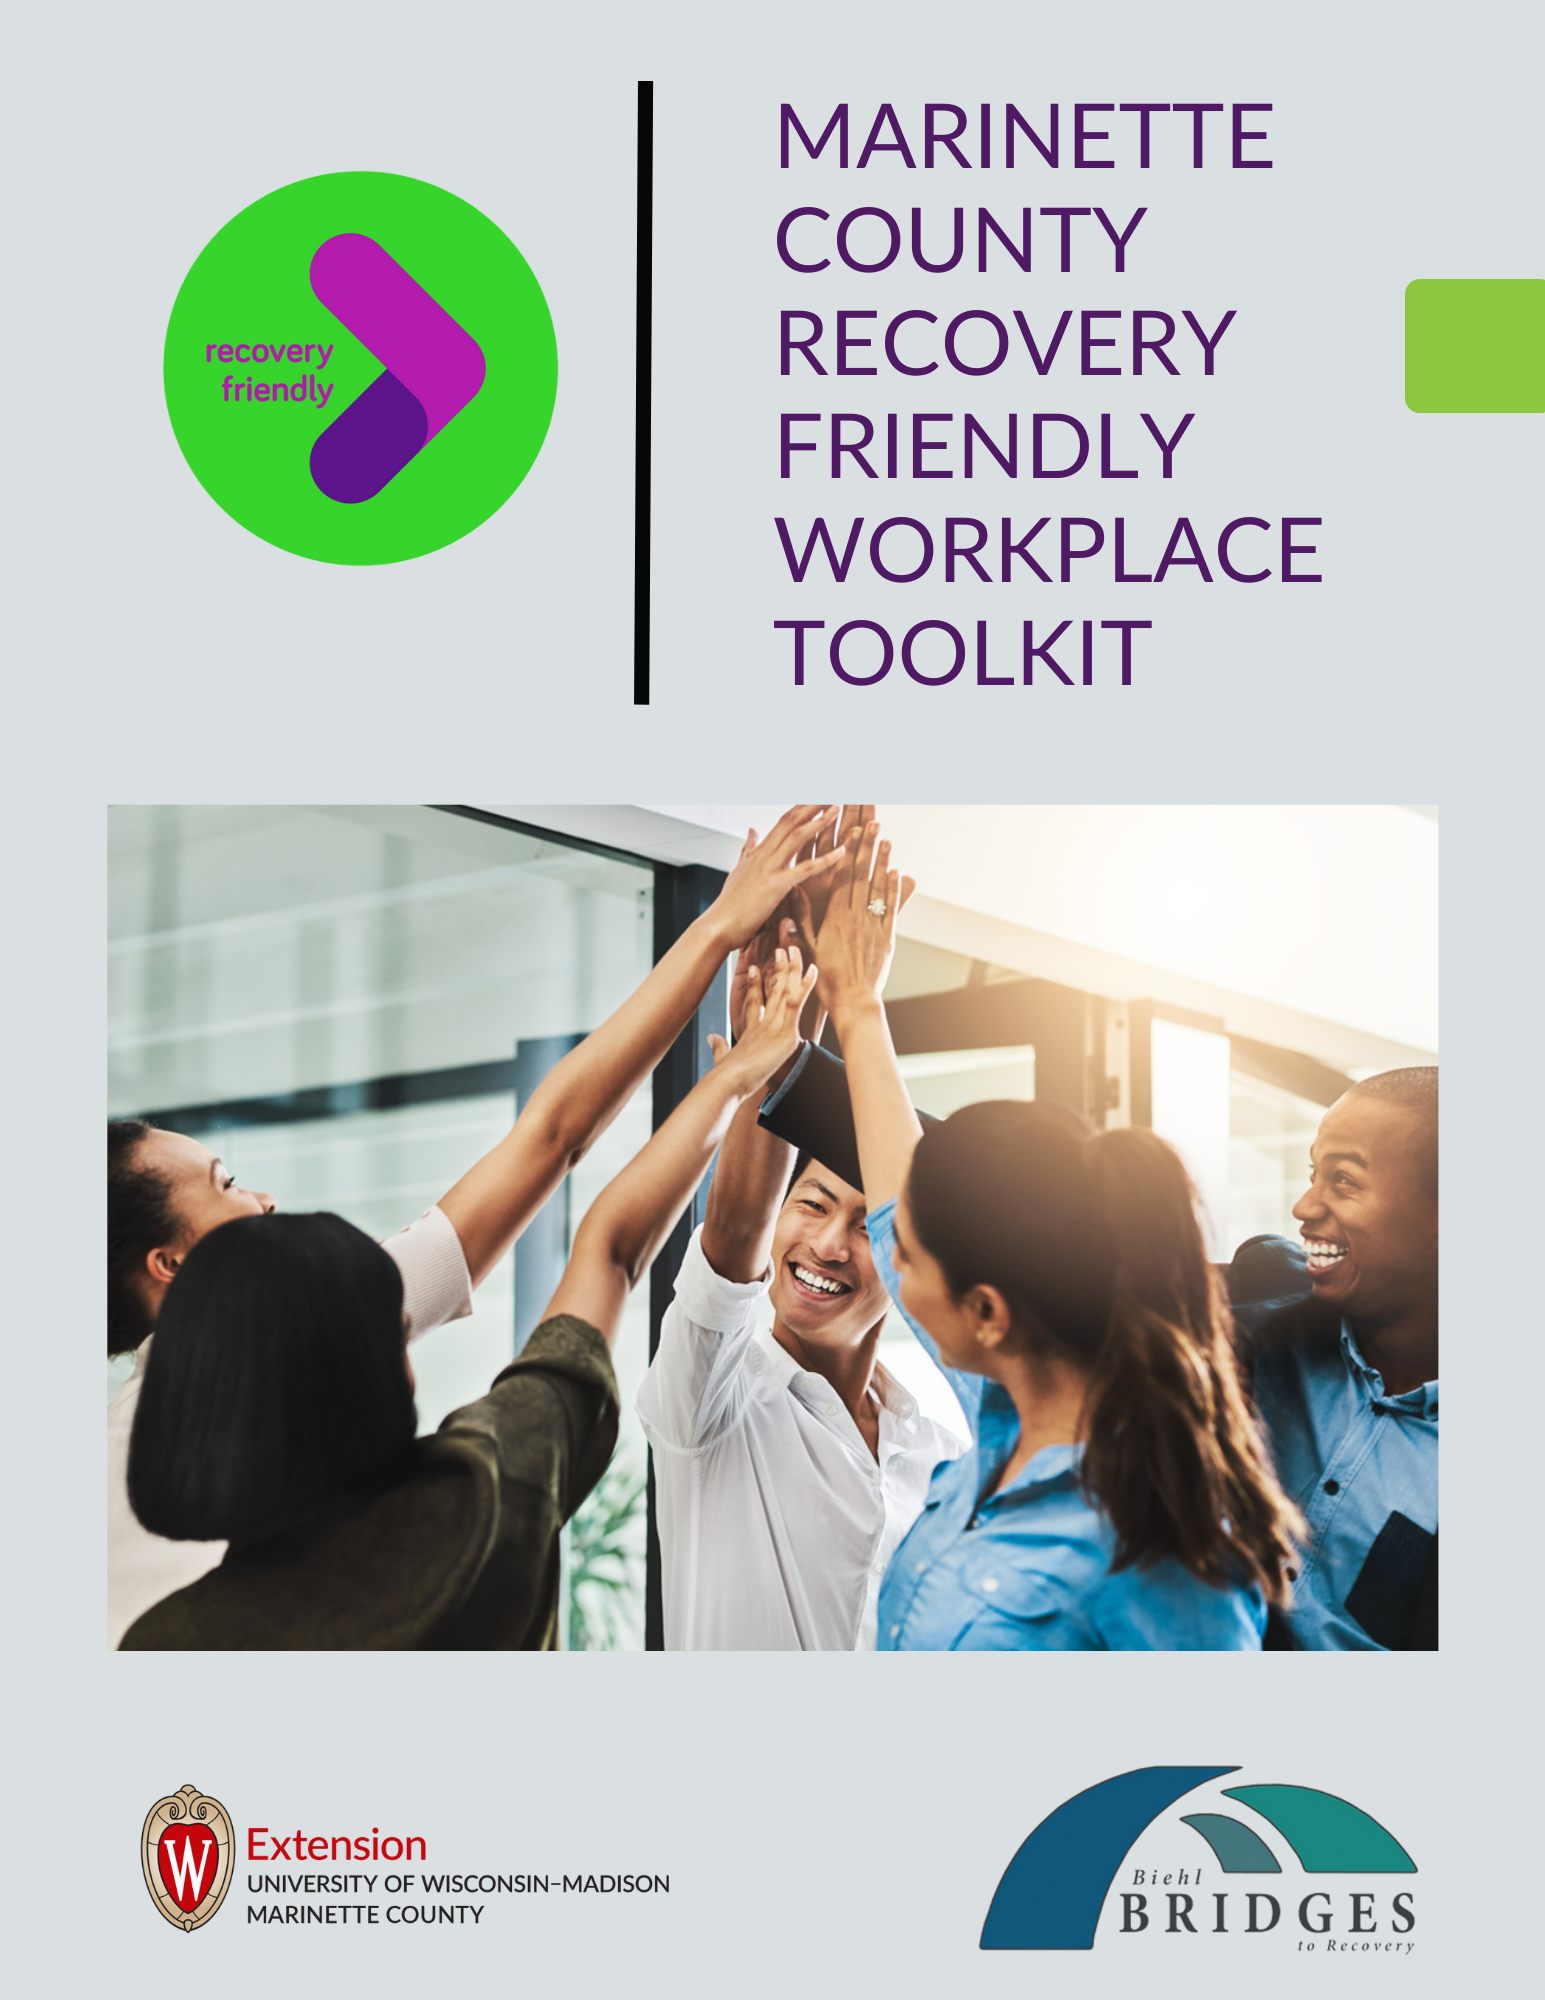 Cover of the Marinette County Recovery Friendly Workplace Toolkit featuring the Extension logo and The Biehl Bridges to Recovery logo.